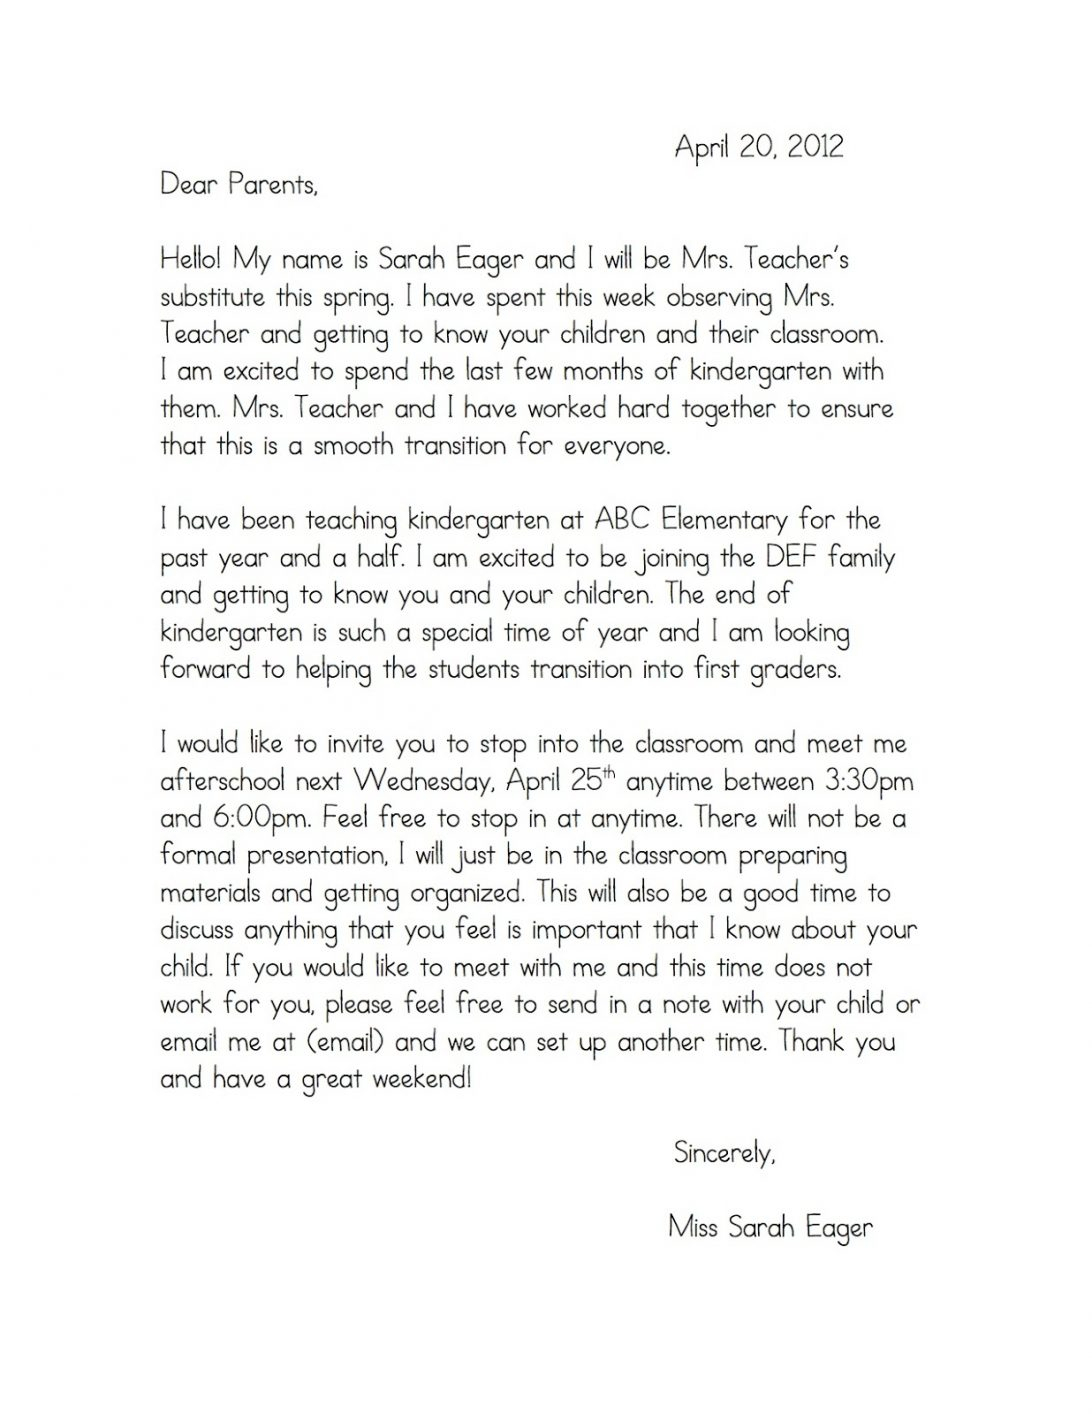 Education Resignation Letter Sample A Resumes For Teachers Intended For Letter To Parents Template From Teachers